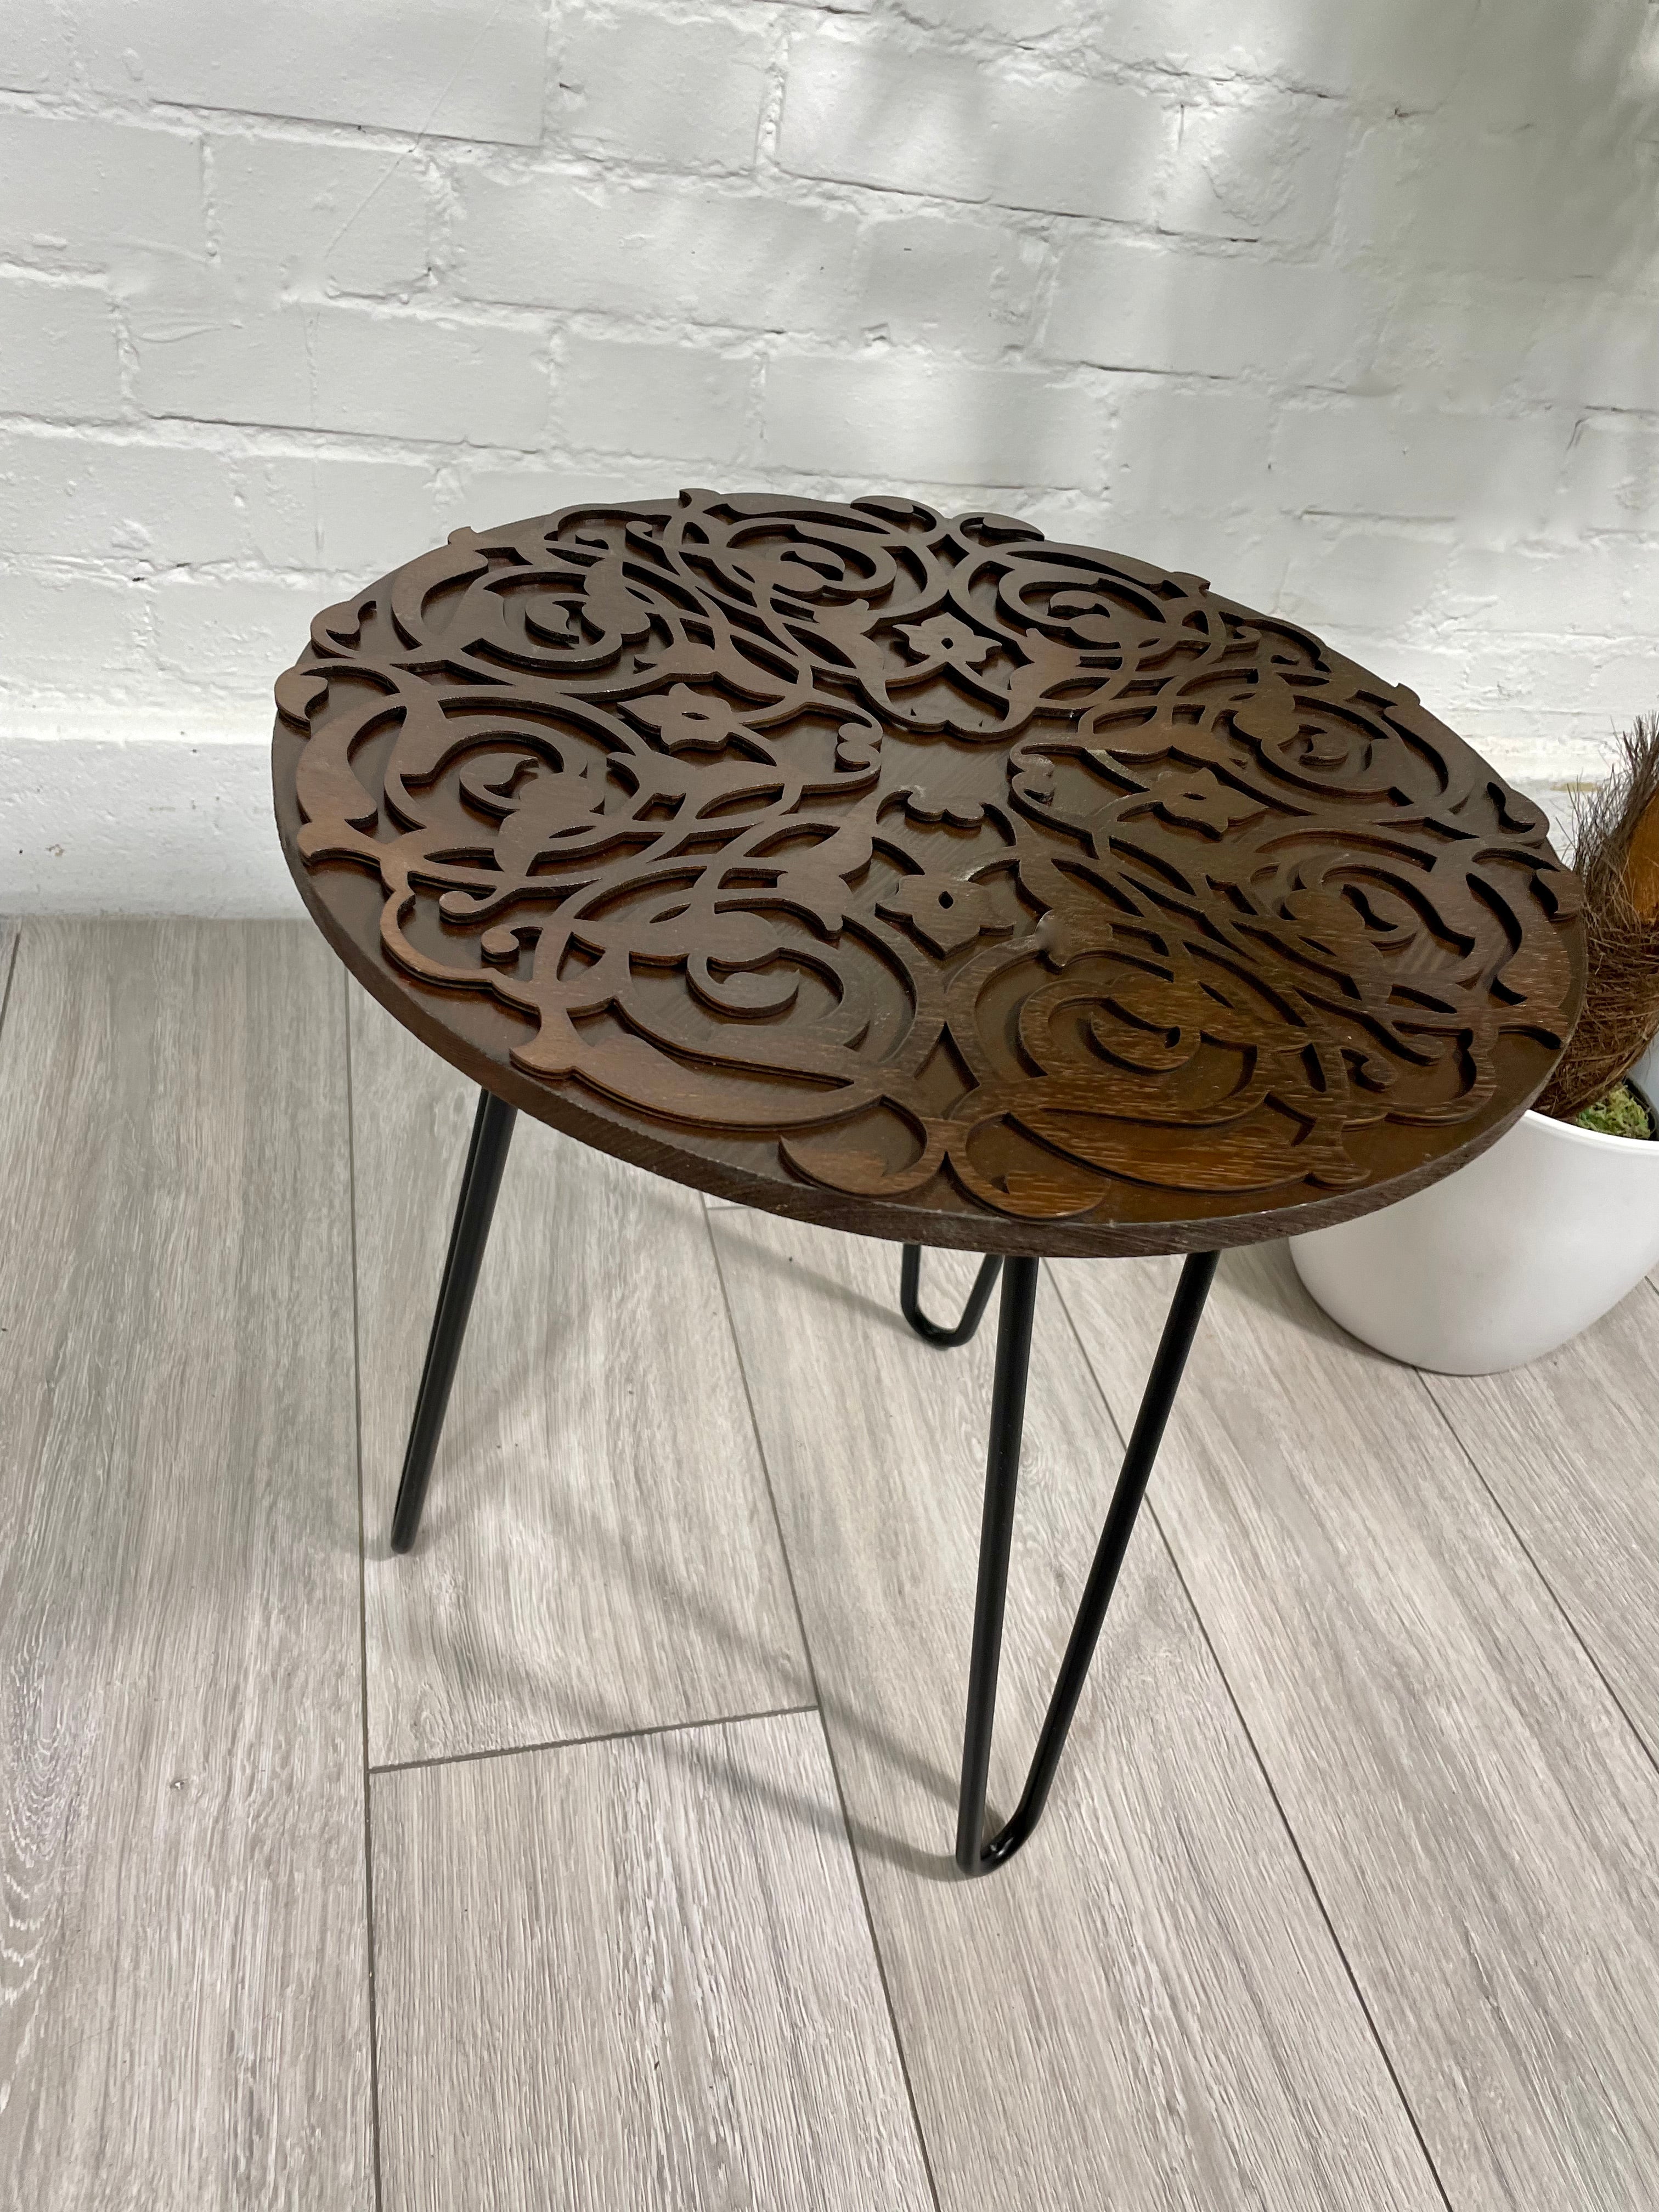 Arabesque Moroccan Side Table In Walnut Finish Pin Legs Zellige Table Glass Top